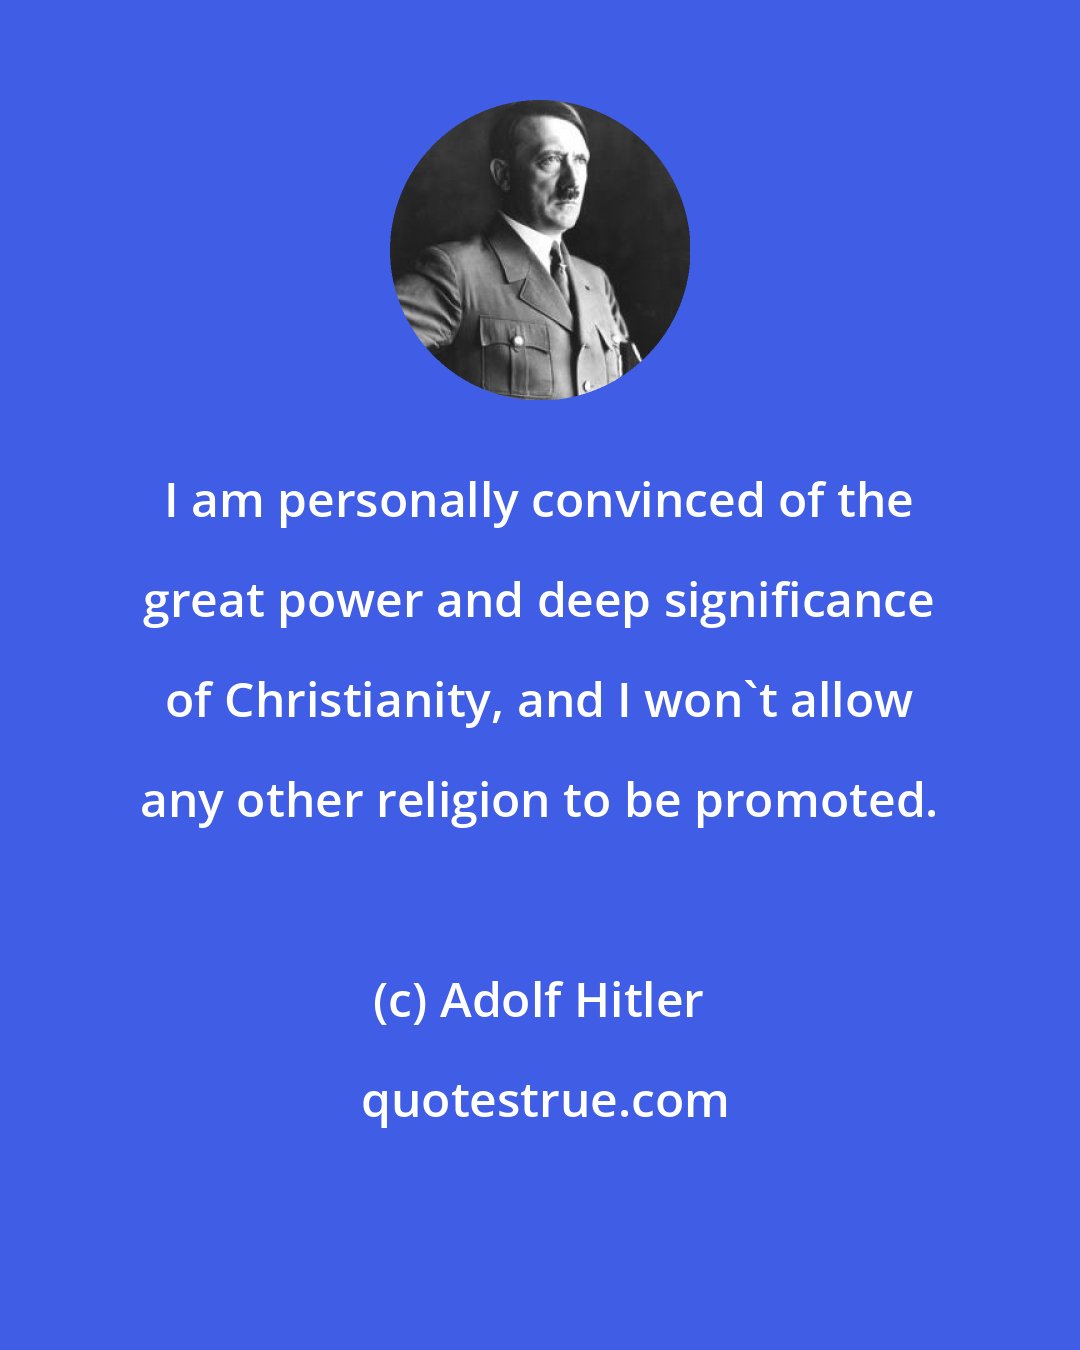 Adolf Hitler: I am personally convinced of the great power and deep significance of Christianity, and I won't allow any other religion to be promoted.